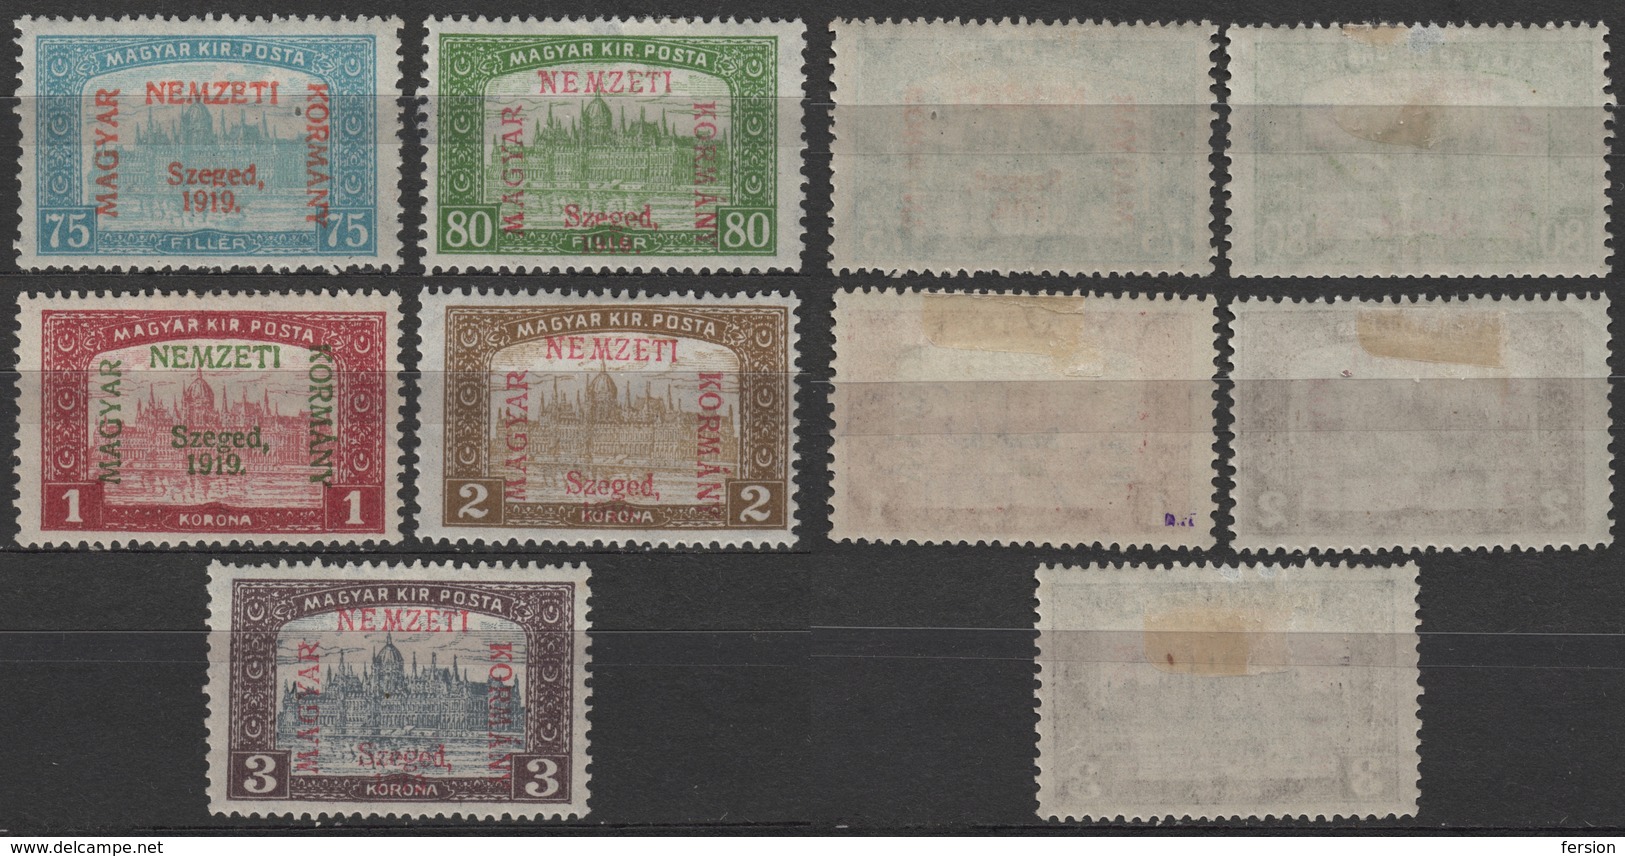 1919 France Occupation Local SZEGED - Hungary - Parliament Overprint - MH LOT - Unused Stamps